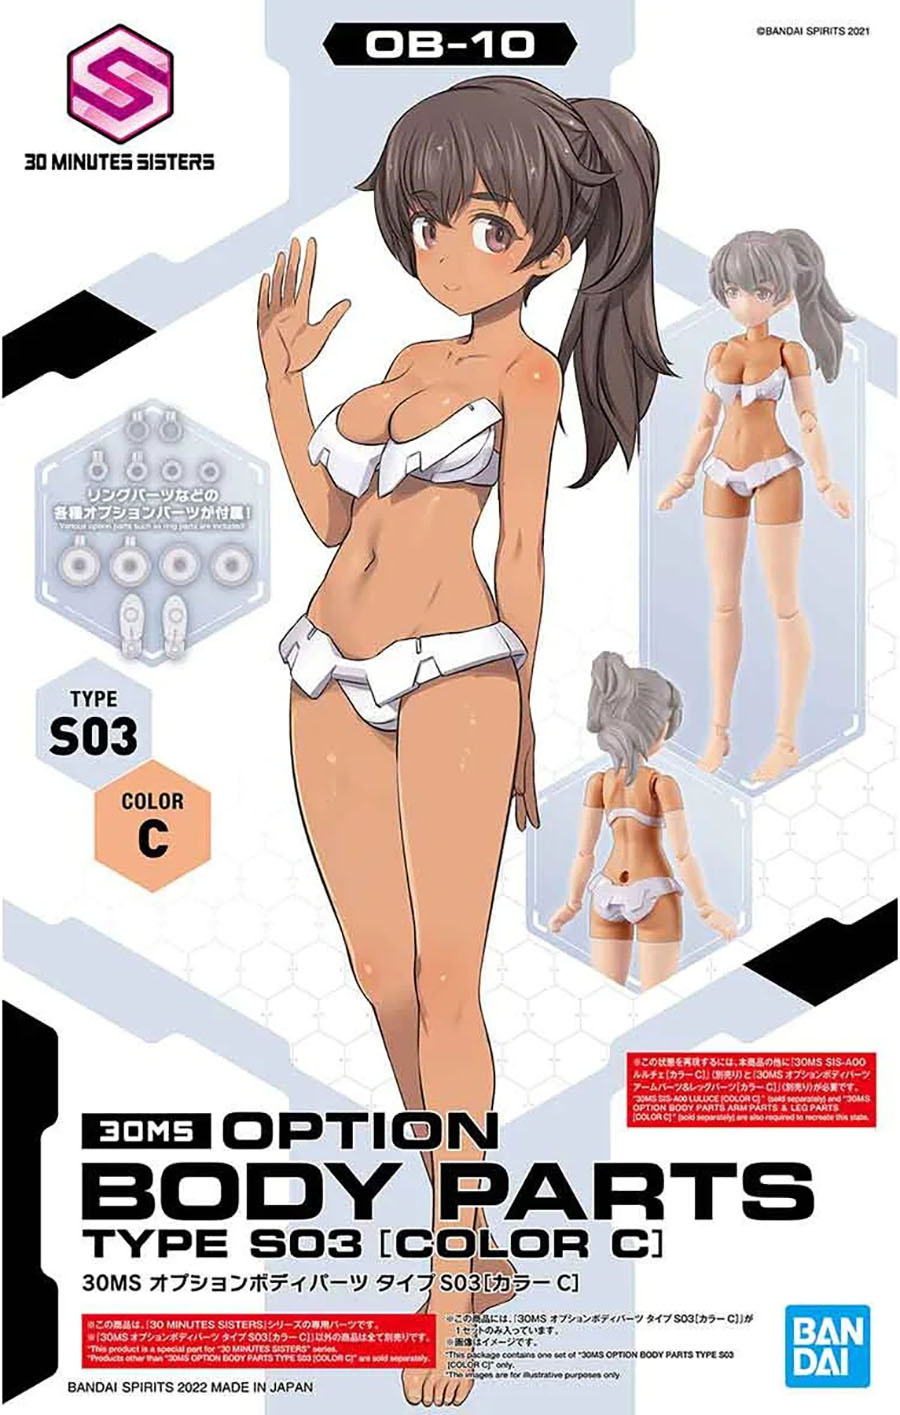 30 Minutes Sisters Option #OB-10 Body Parts Type S03 (Color C)